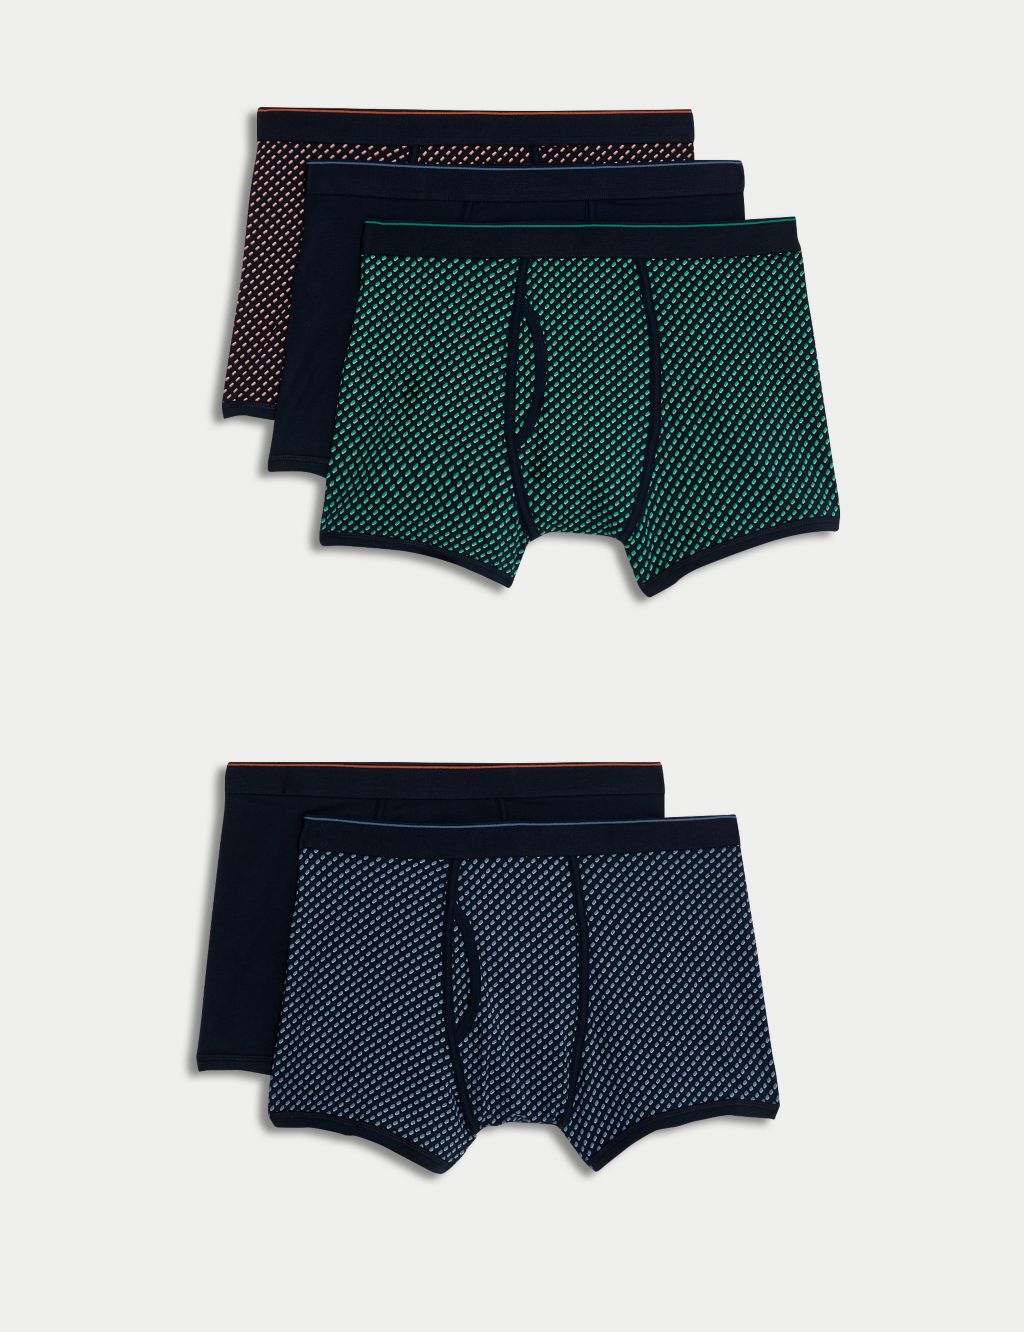 Harry Potter Boys' Underwear Multipacks with Assorted Prints